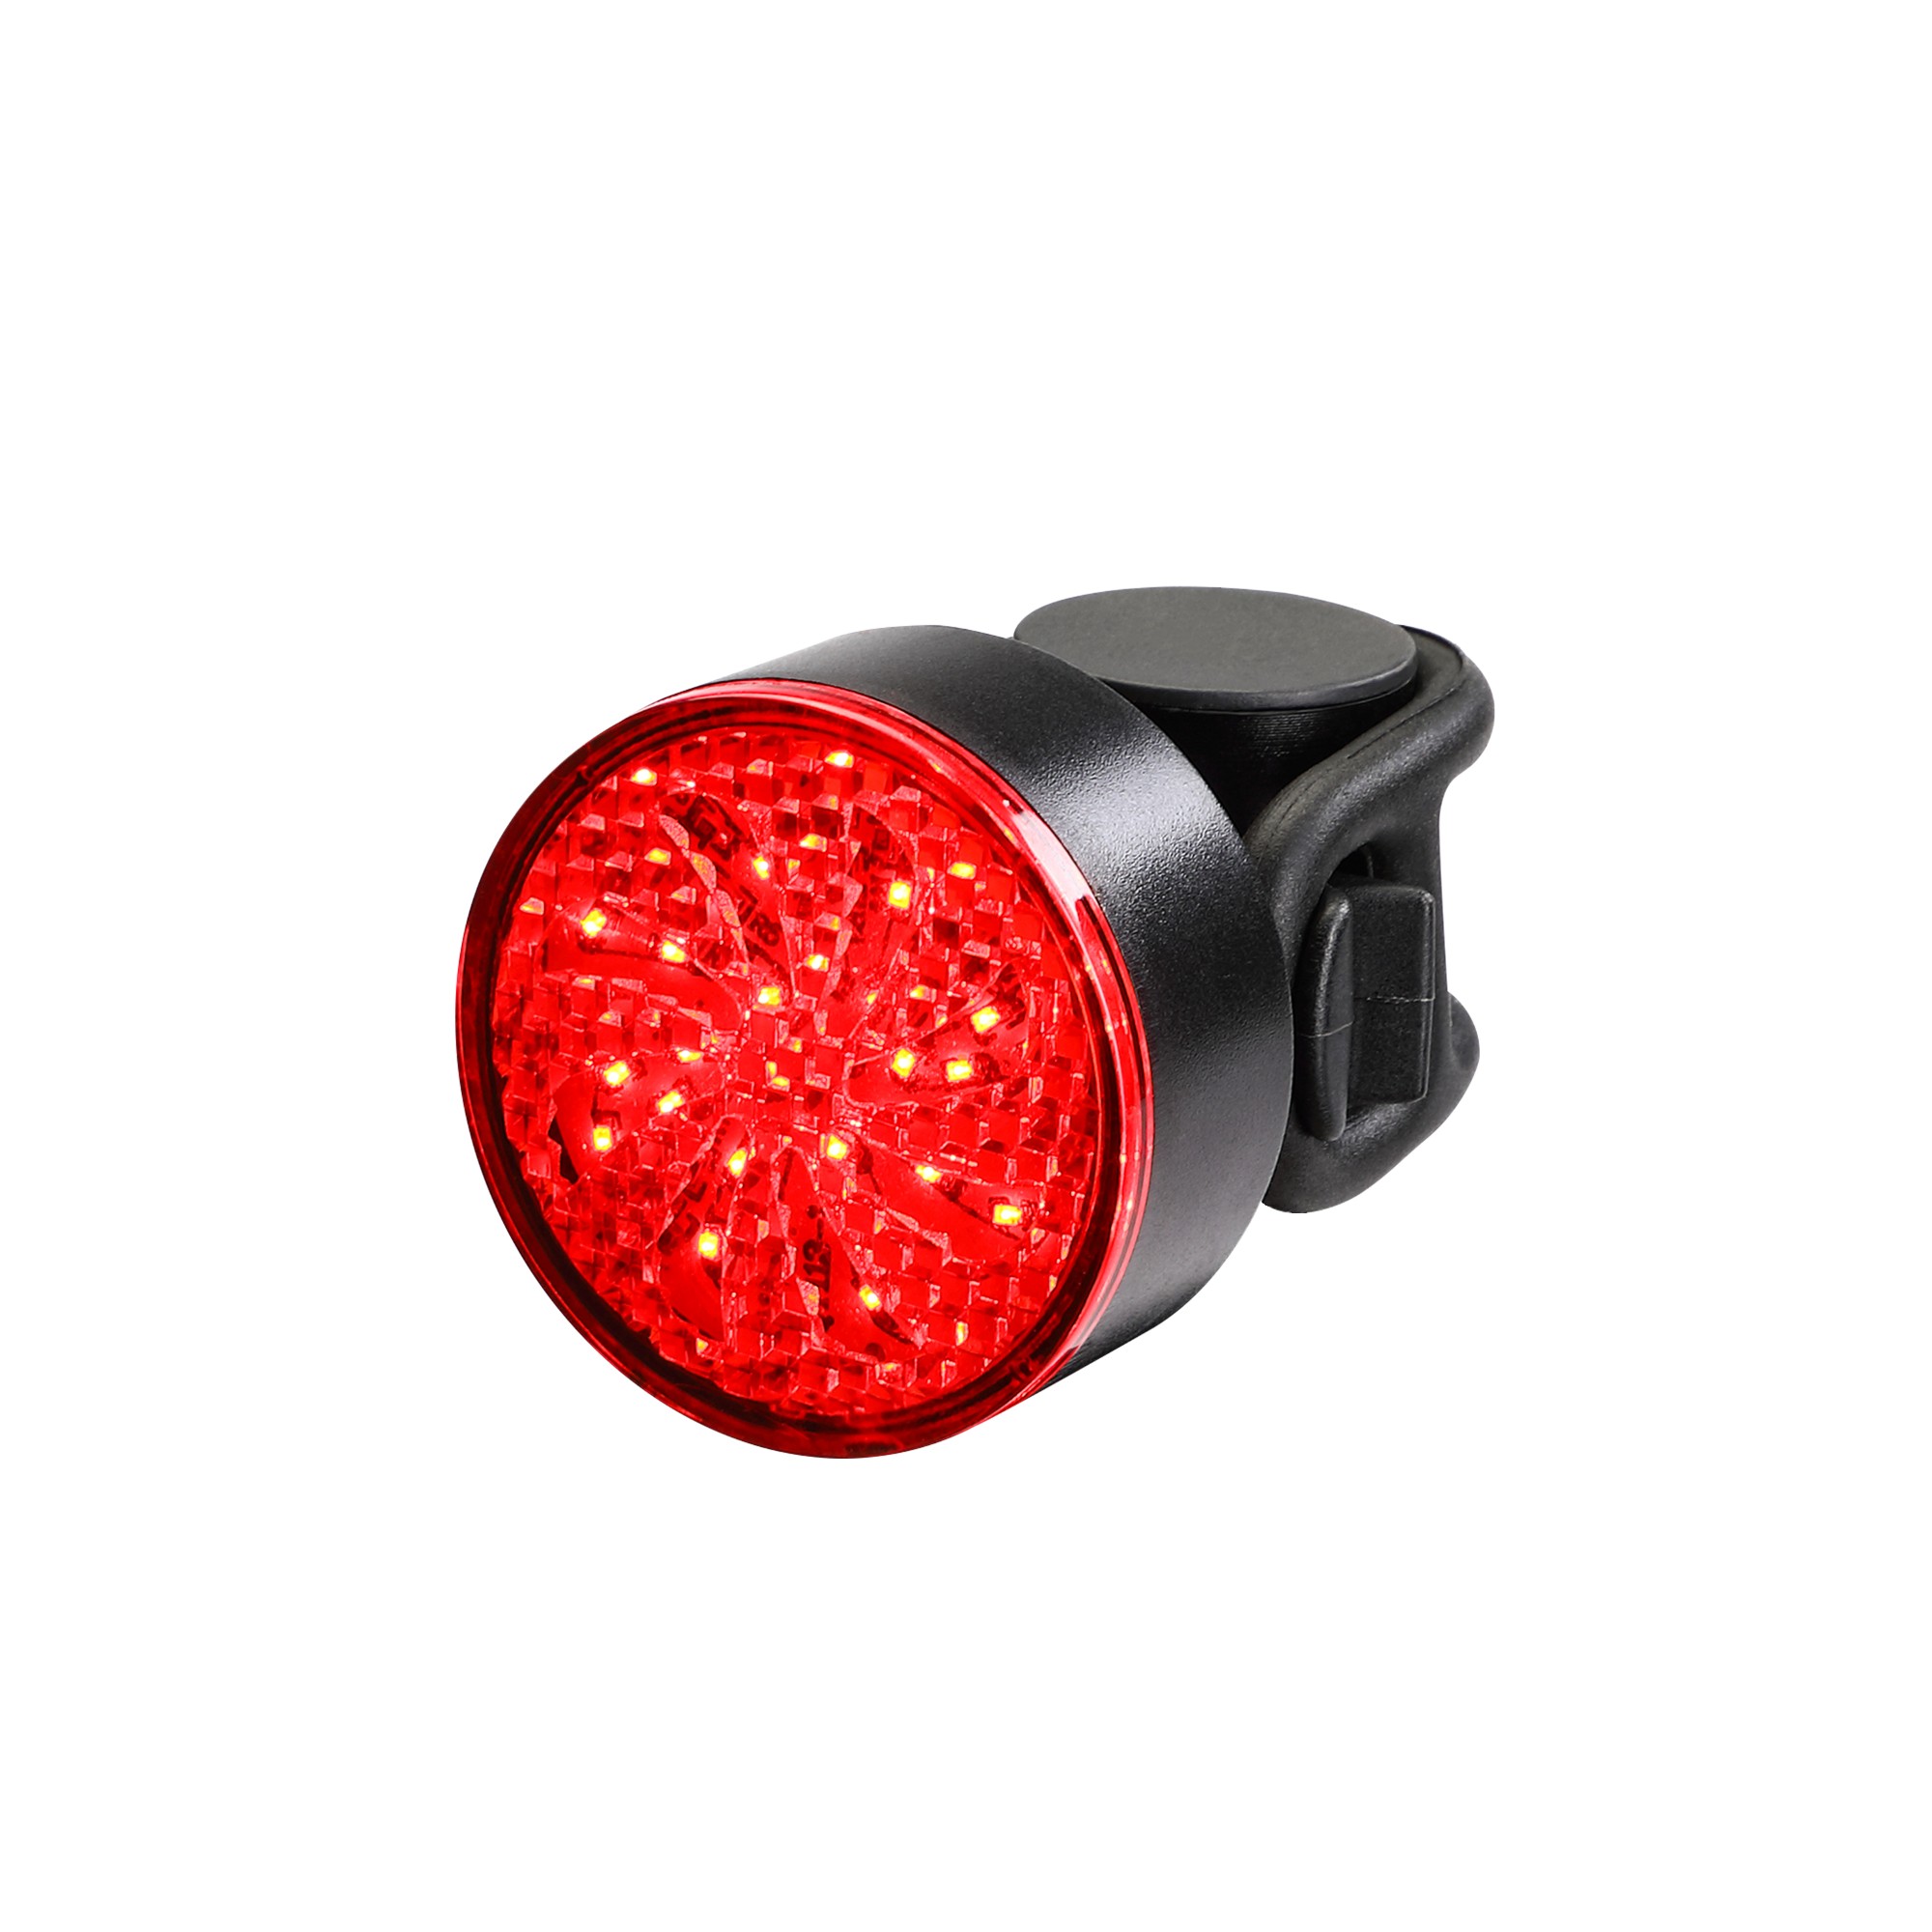 USB Rechargeable bike tail light BC-TL5542